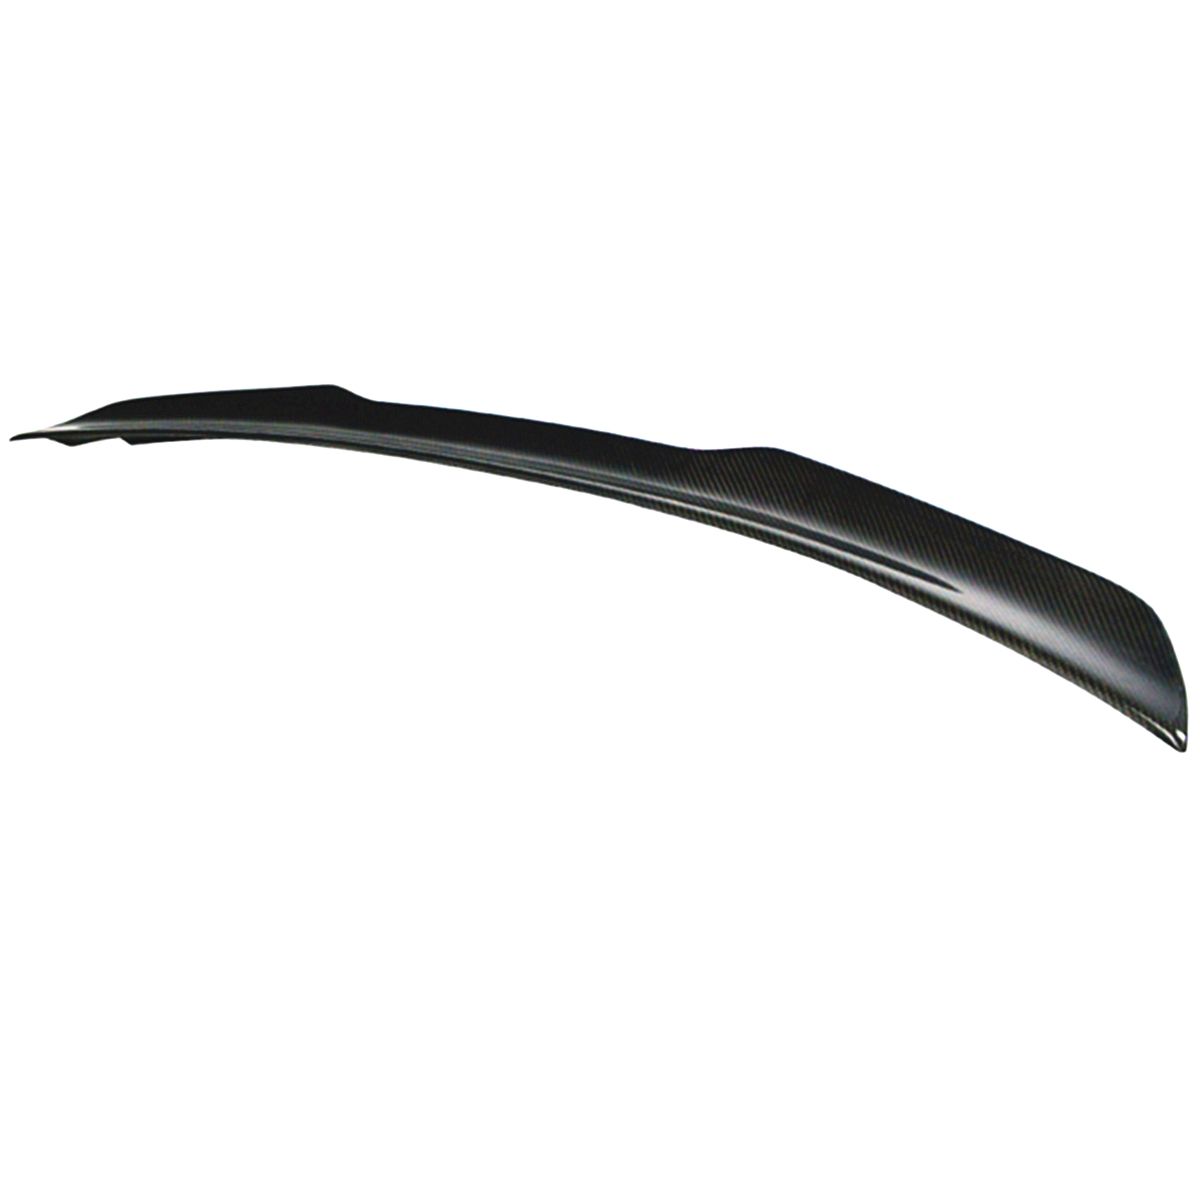 Carbon-Fiber-Car-Rear-Trunk-Spoiler-Wing-Fits-For-Ford-Mustang-GT-H--2015-2019-1551519